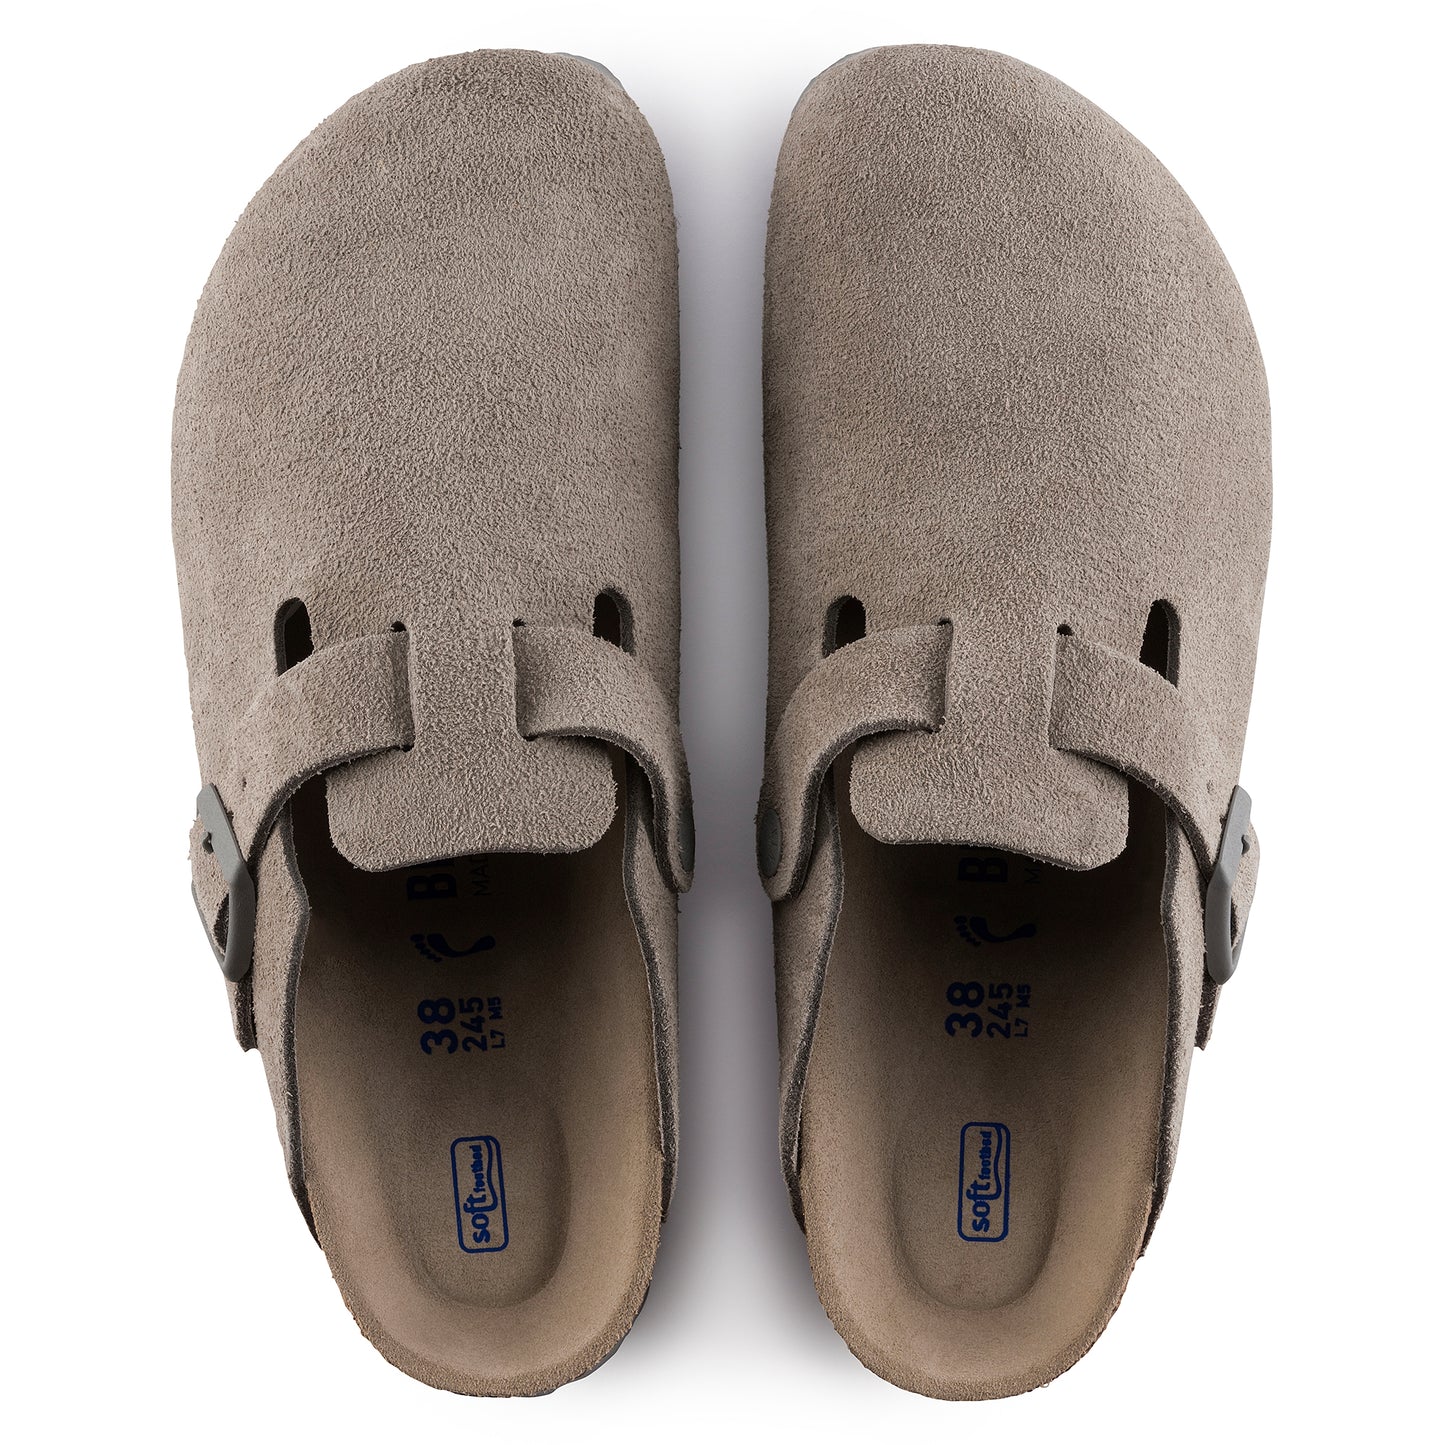 Birkenstock Unisex Boston Soft Footbed Suede Leather - Stone Coin